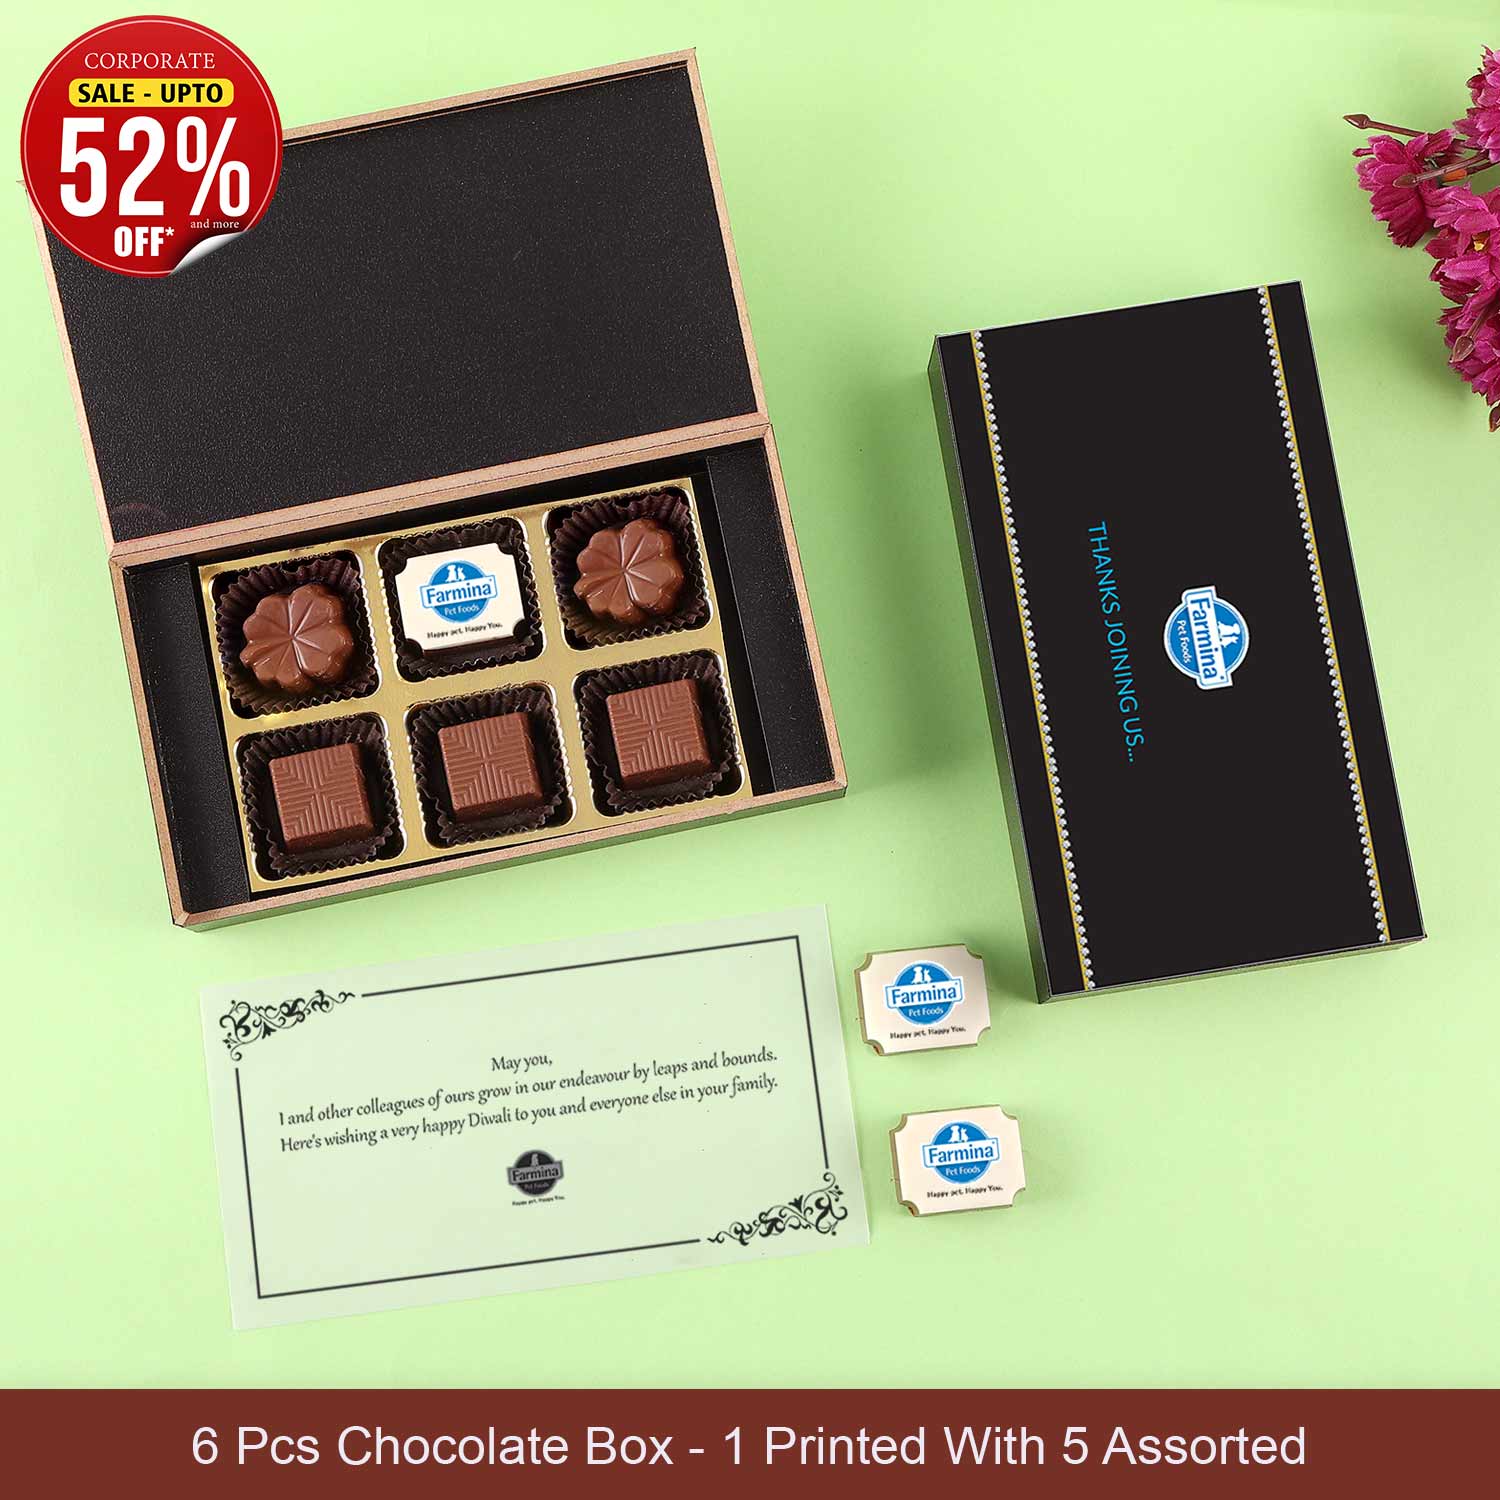  Premium Chocolate for Corporate Gifts corporateevents  promotion  promotionalproducts  promotionalmerchandise  events  eventmanagement  eventmarketing  eventagency  brandbuilding  brandpromotion